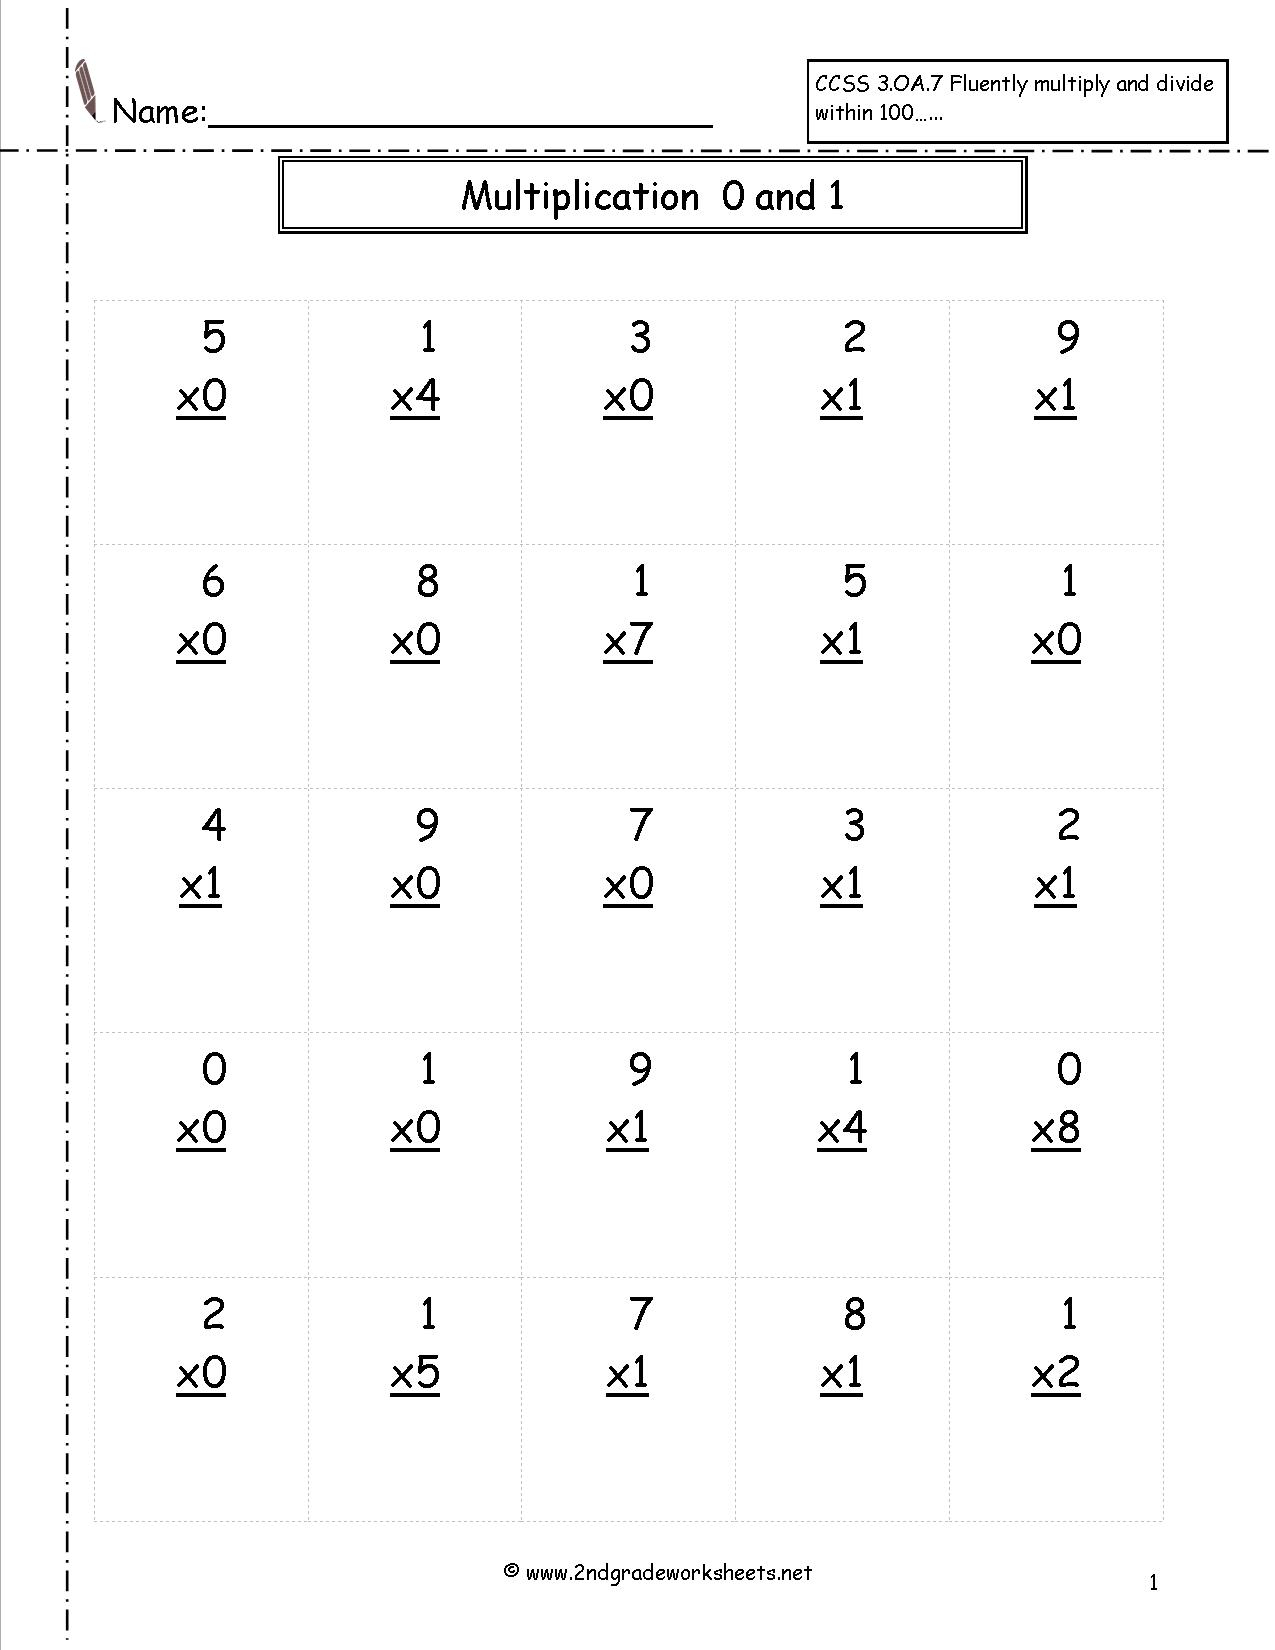 Multiplication Worksheets And Printouts throughout Multiplication Worksheets Number 2